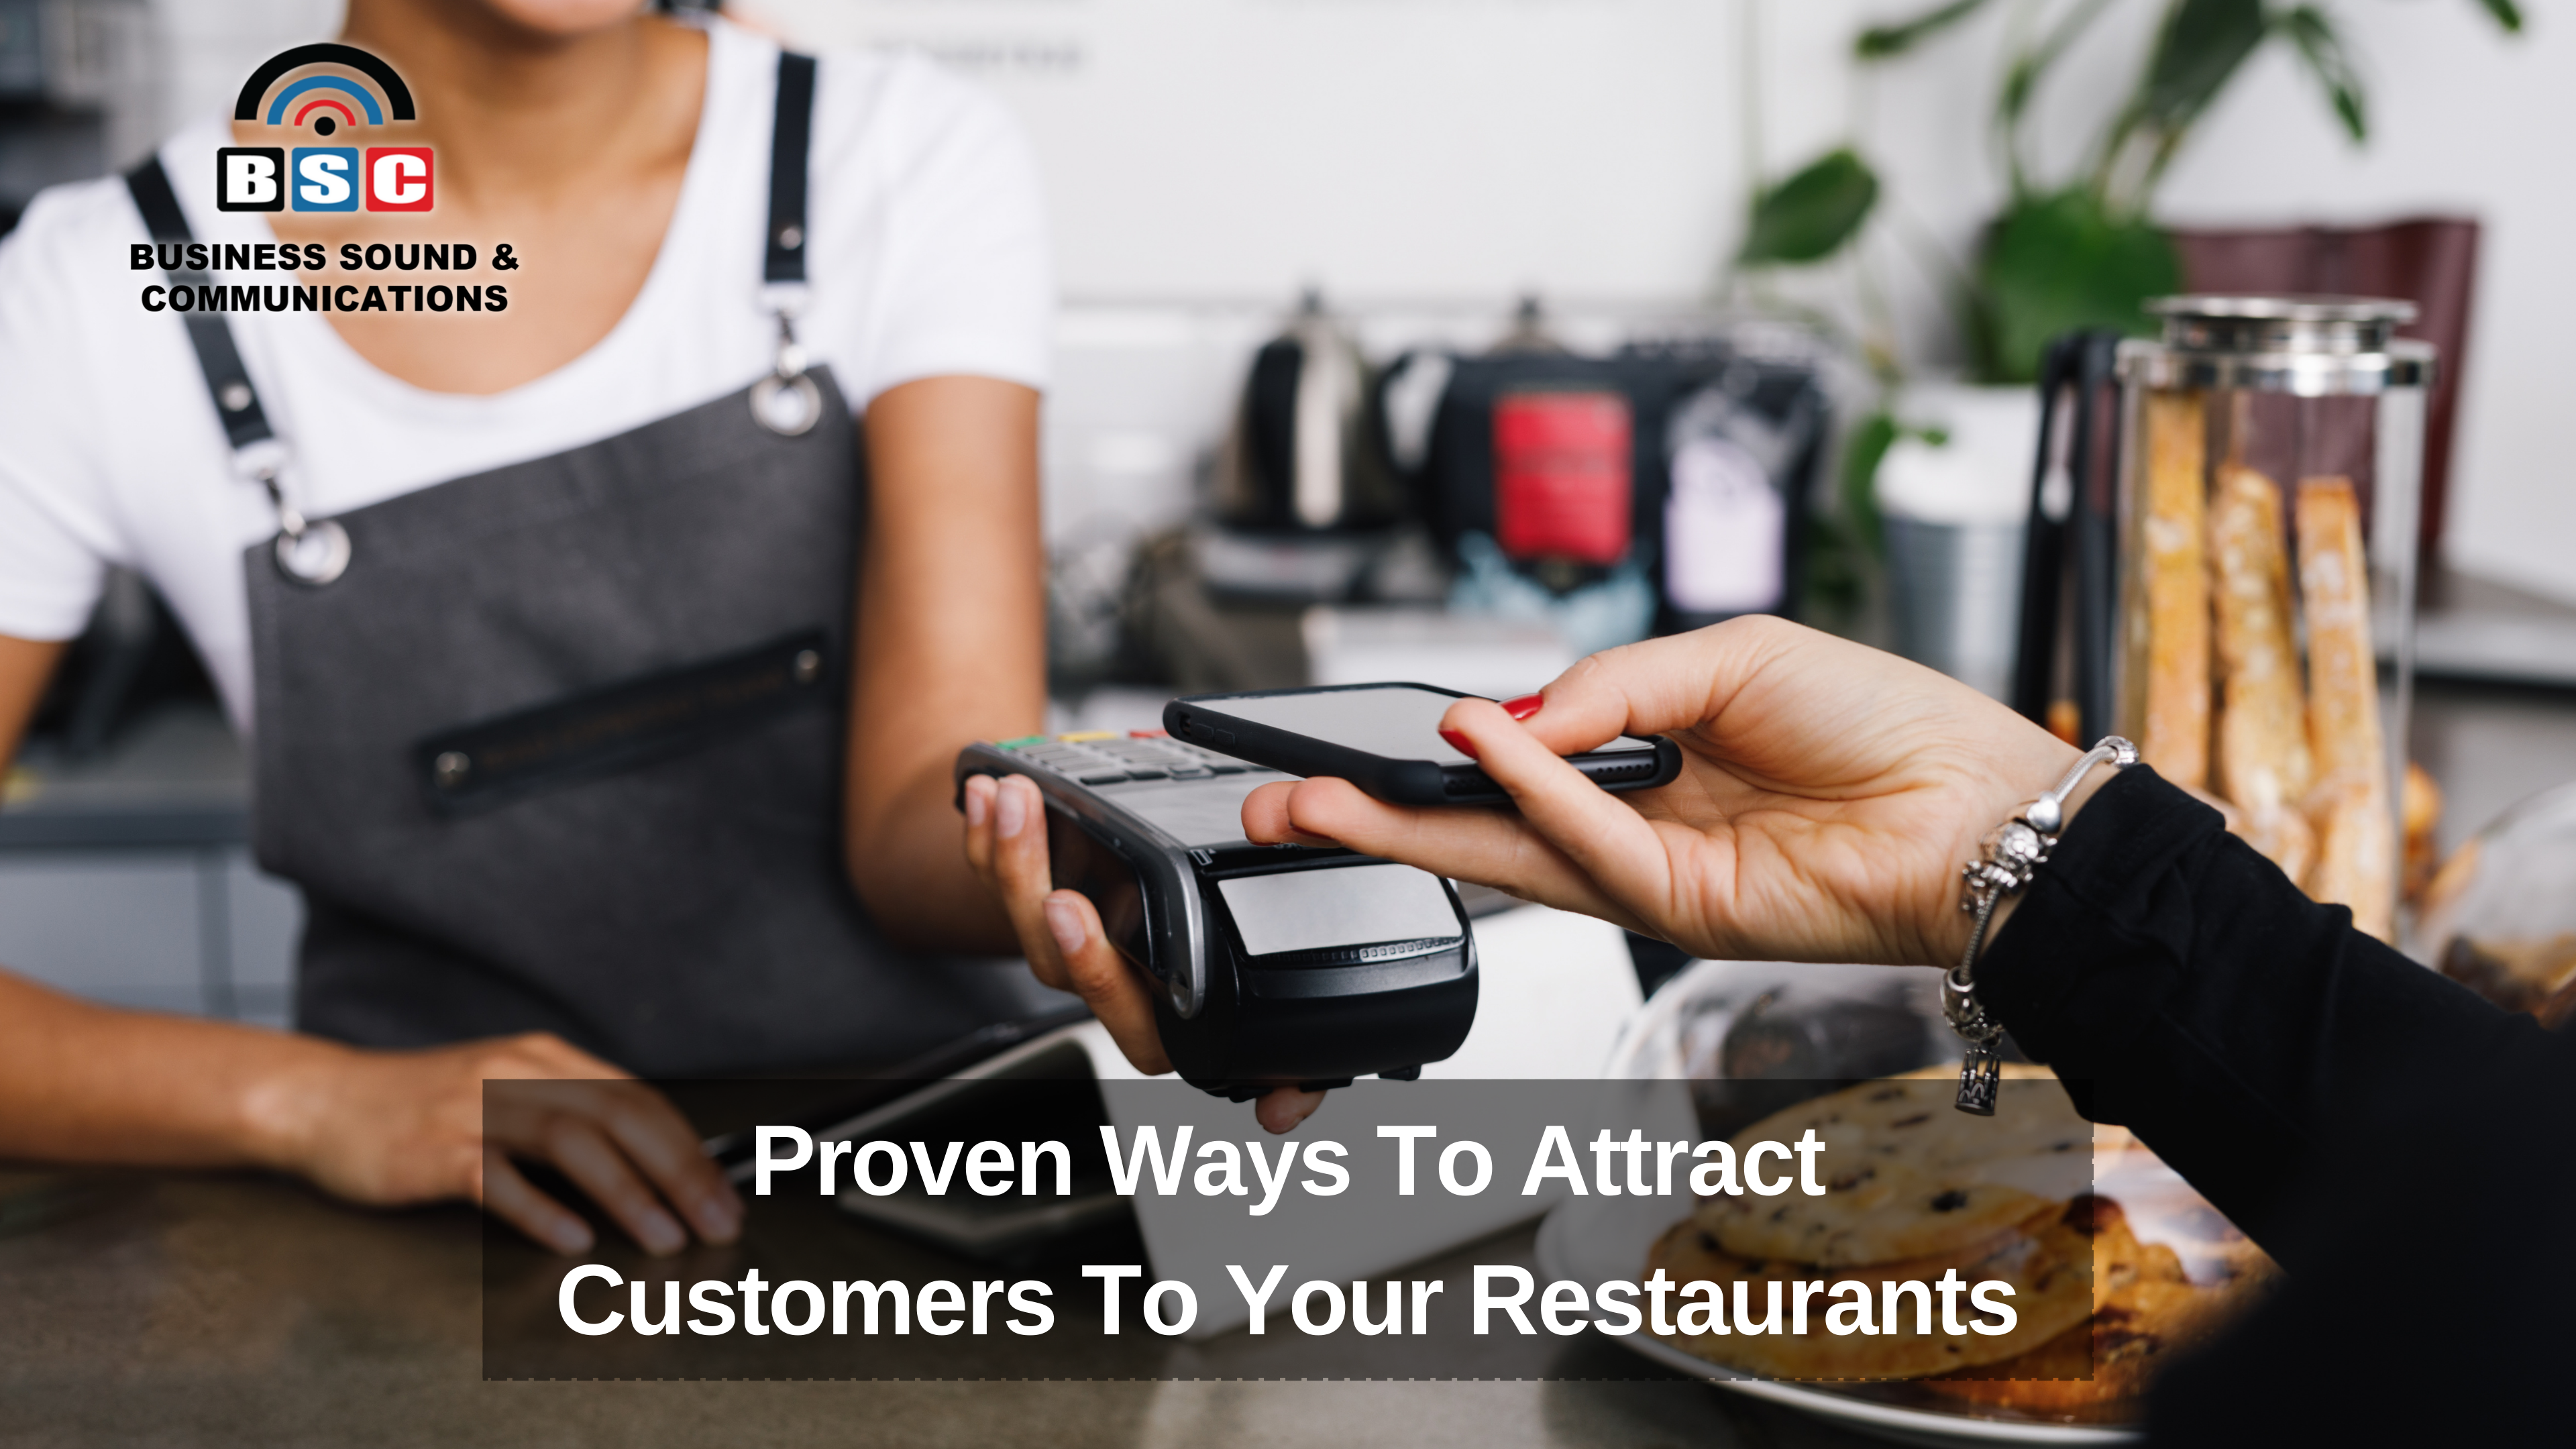 Proven Ways to Attract More Customers to Your Restaurant